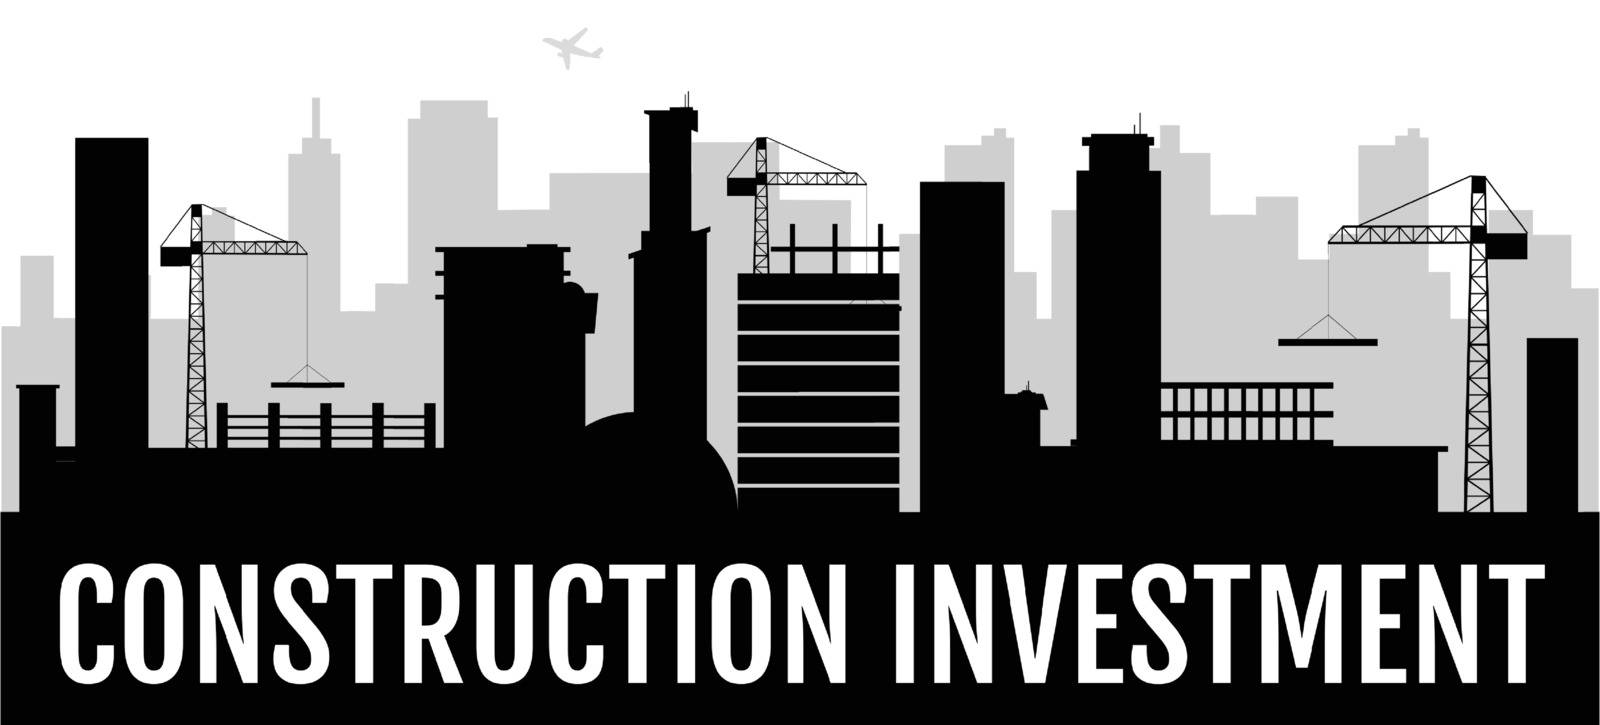 Construction investment black silhouette banner vector template. Urban development, building company horizontal poster monochrome design. Construction site 2d cartoon shape with typography